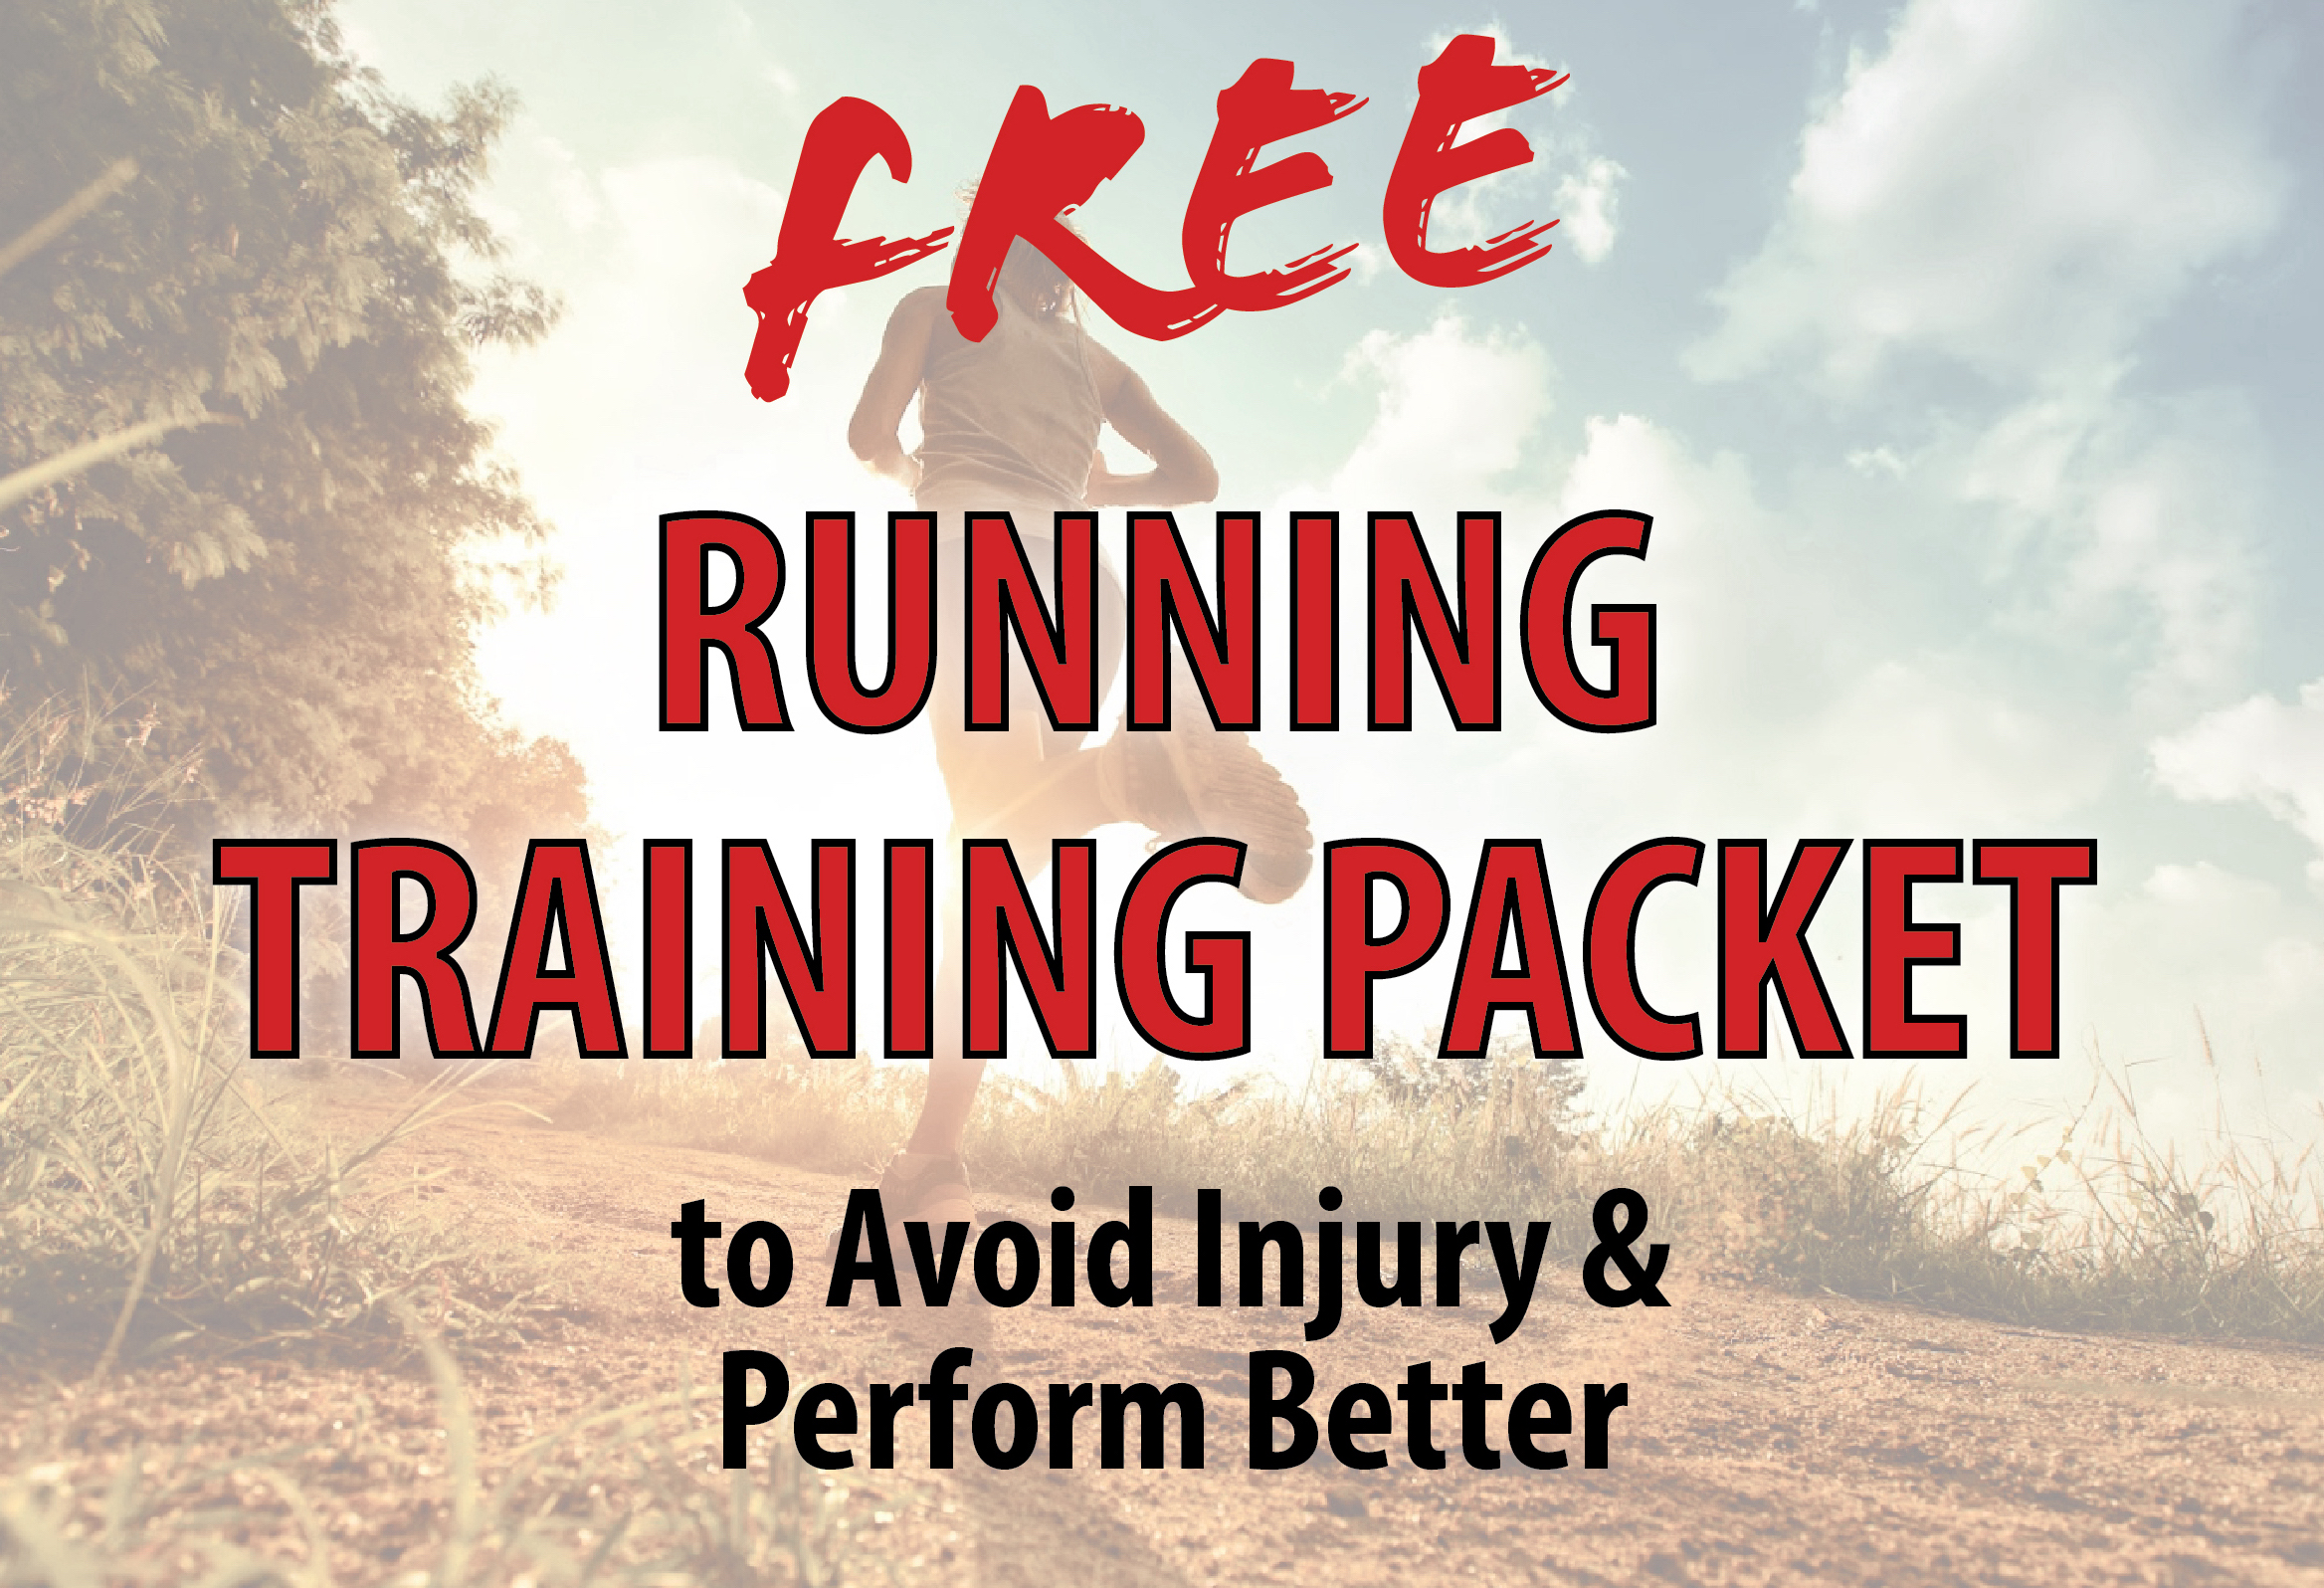 Free Running Training Packet to Avoid Injury & Perform Better from physical therapists